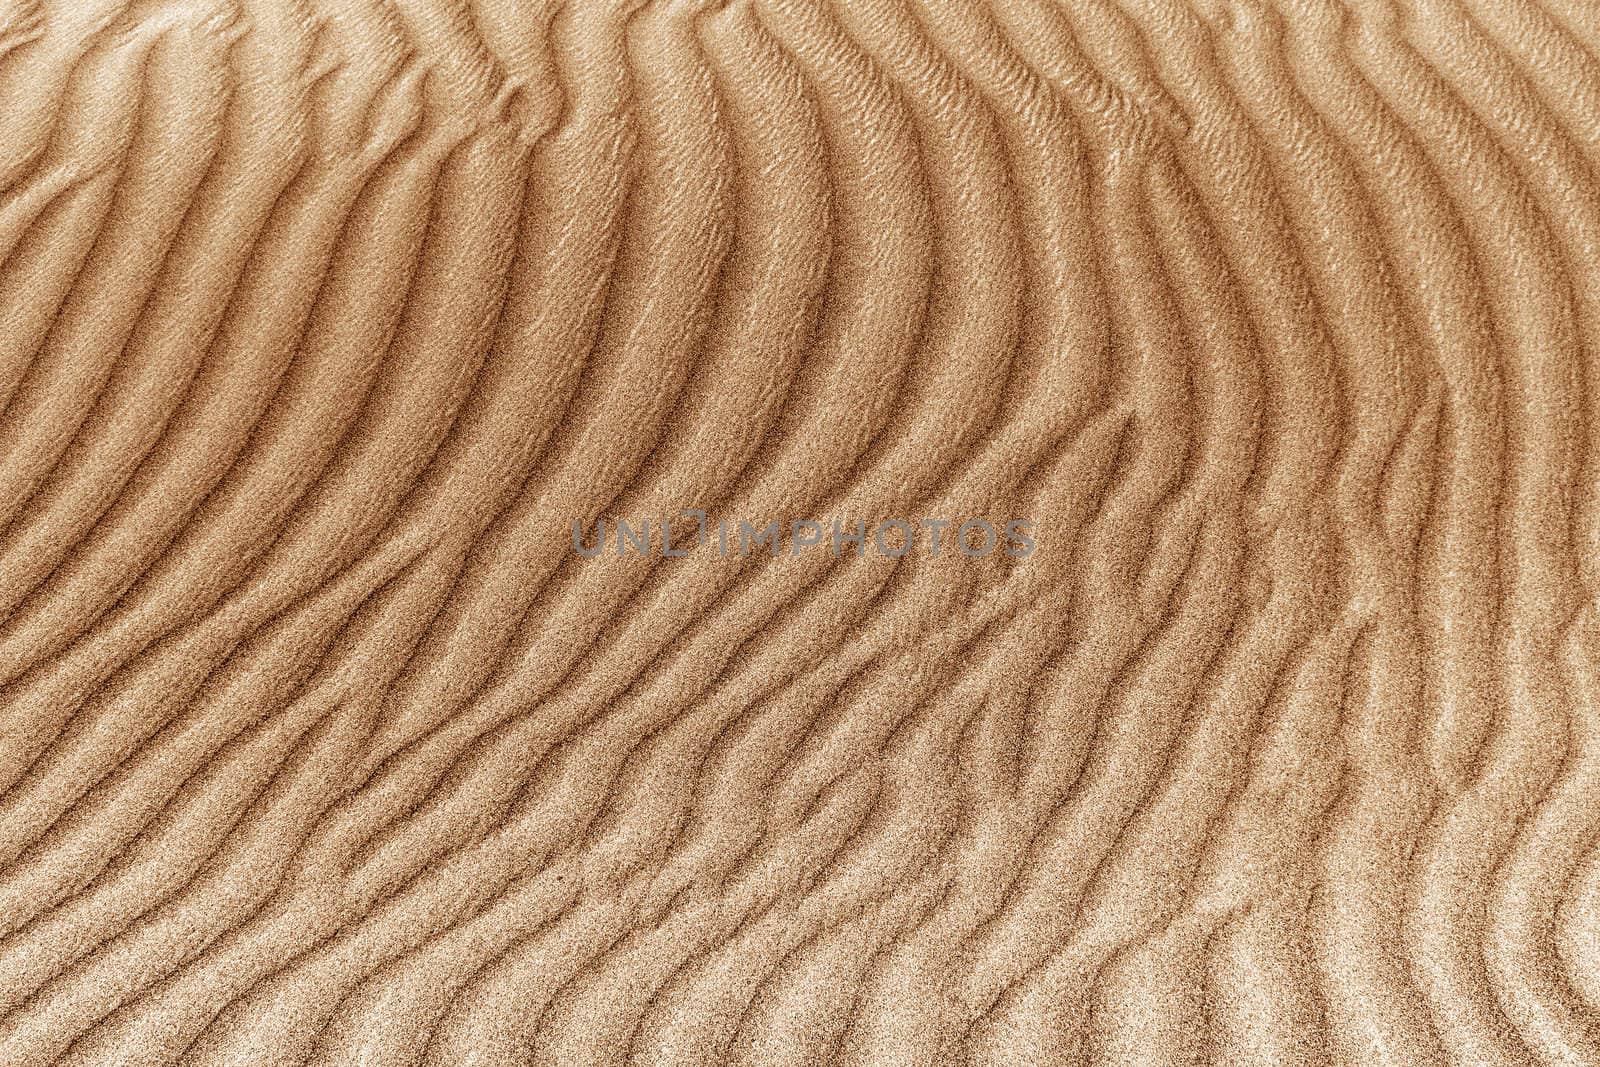 image of sand dunes  by Plus69